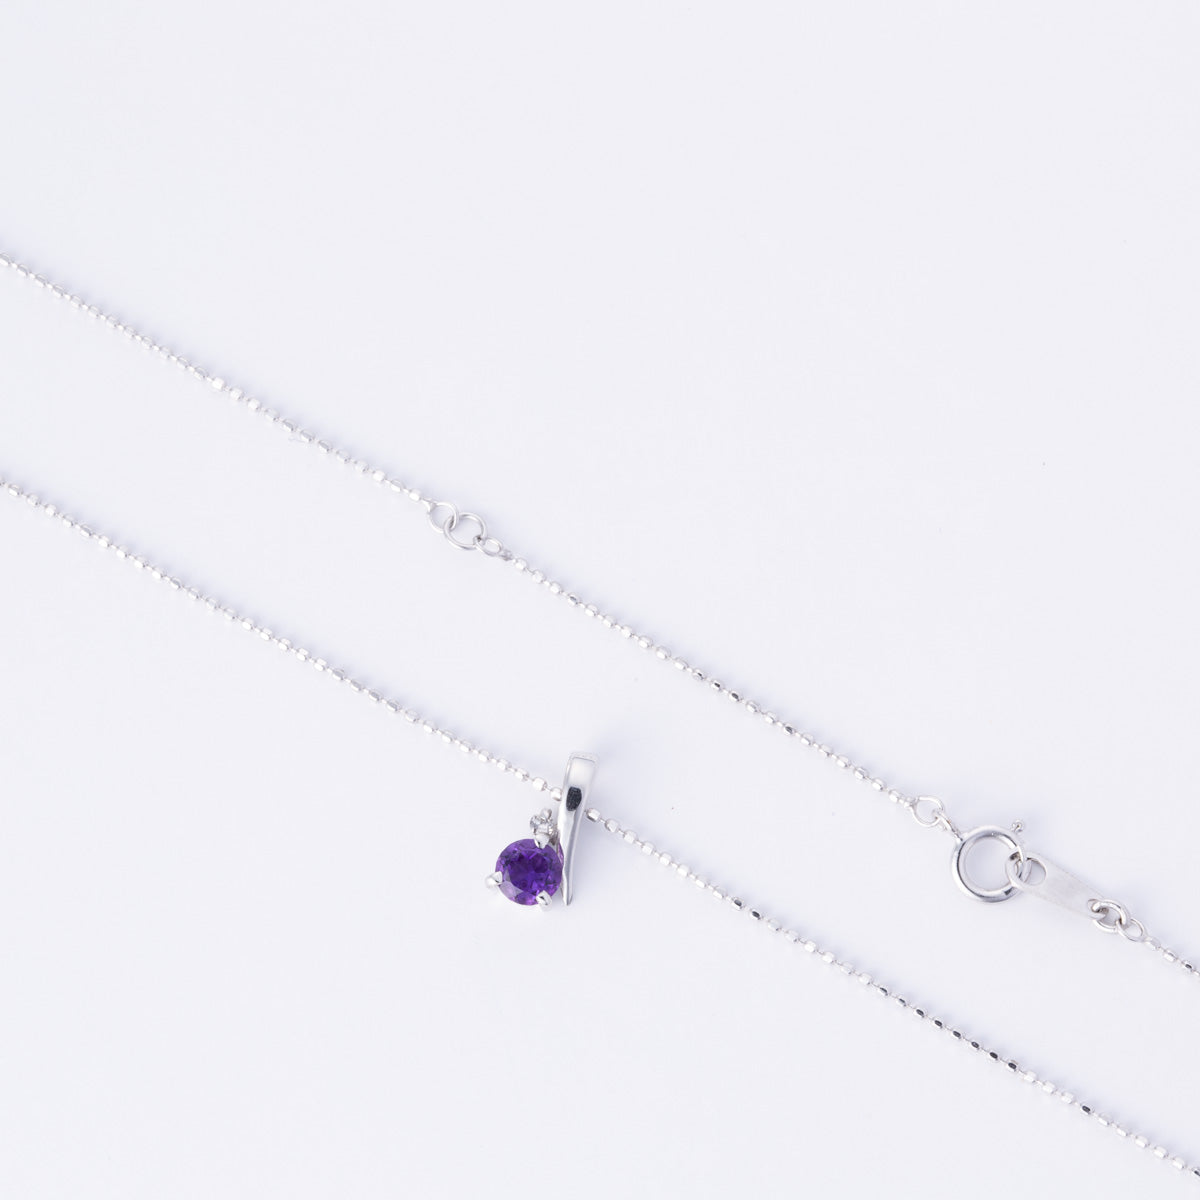 18k White Gold Diamond and Amethyst Necklace | 0.01ct, 0.25ct | 15